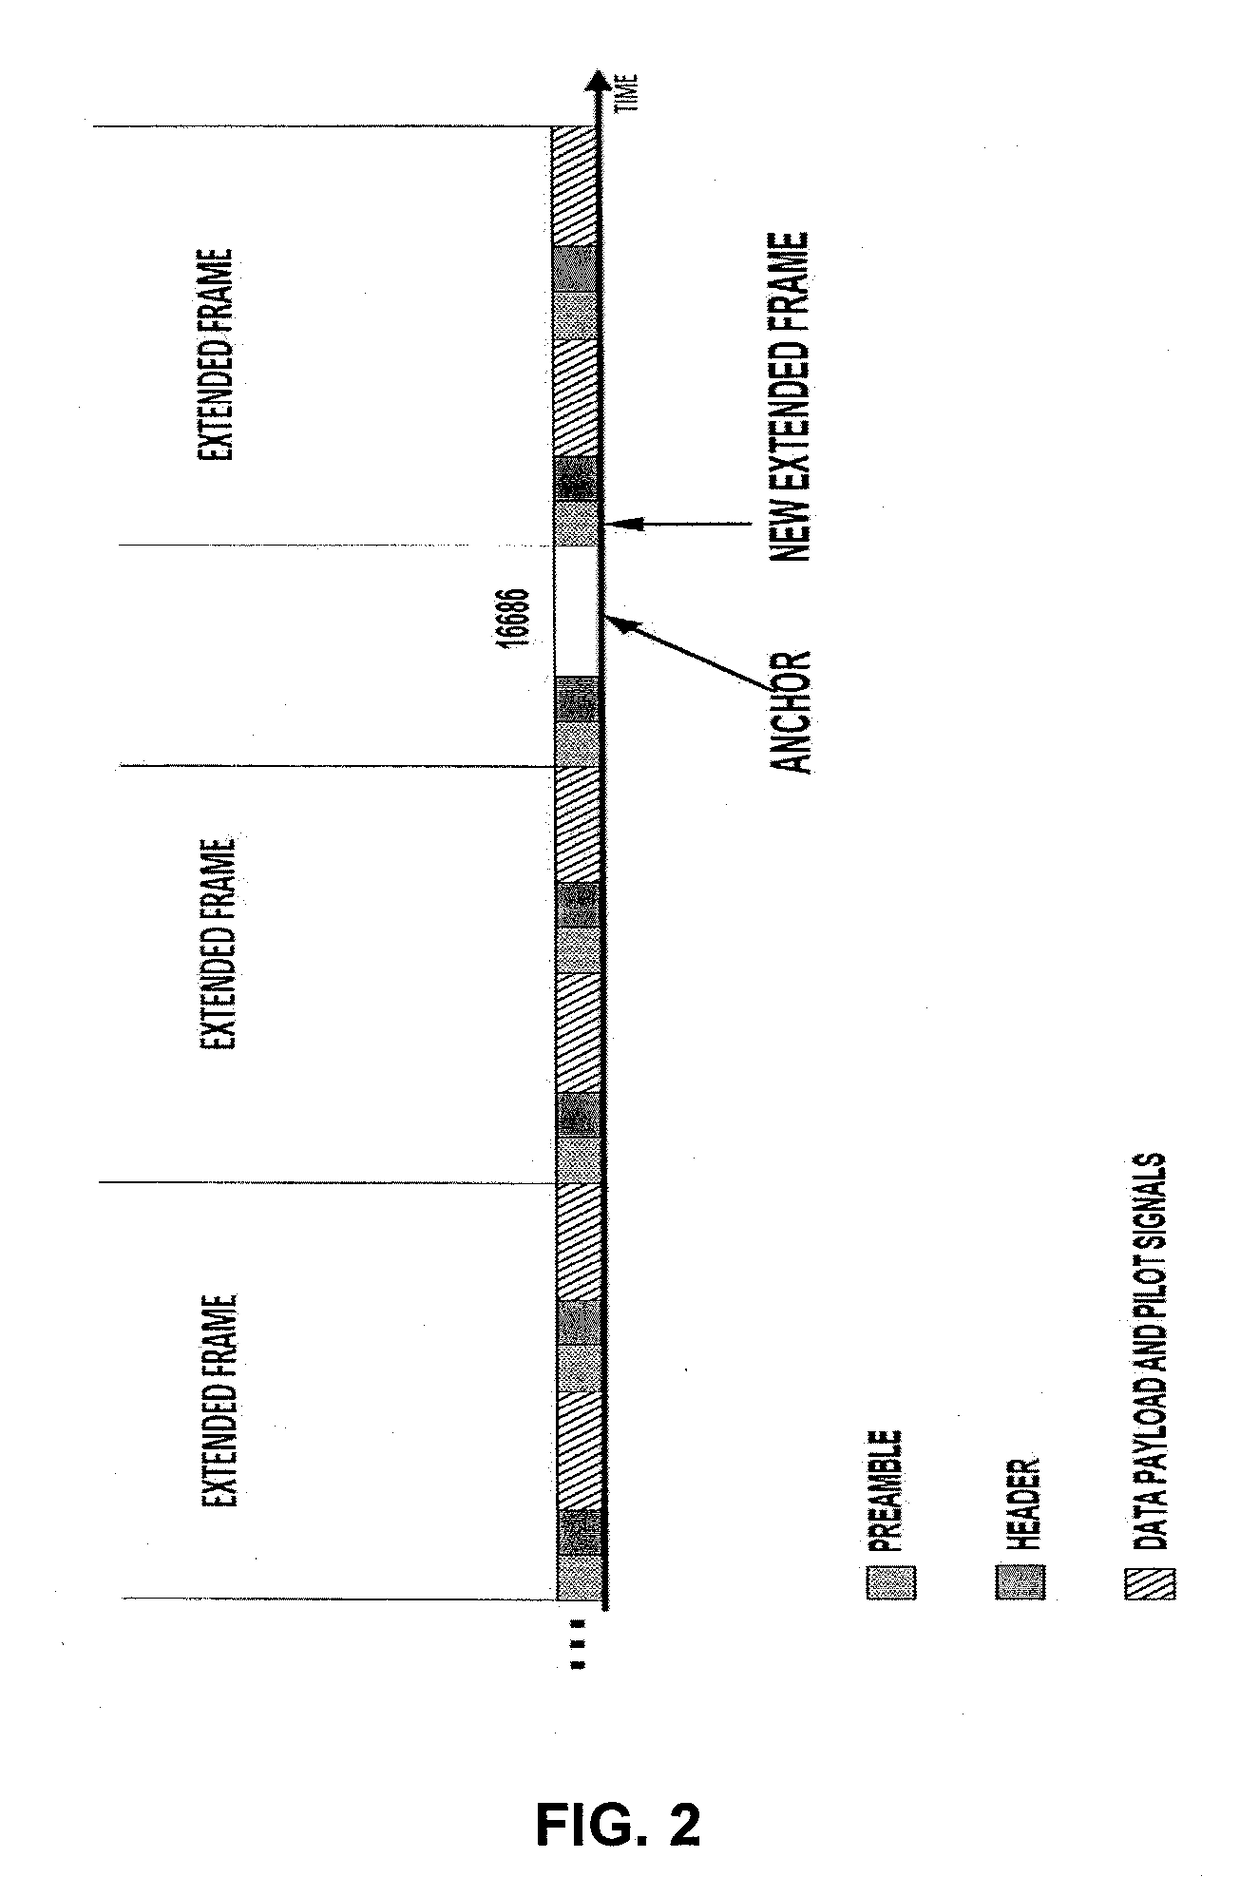 Method and device for operating under extremely low signal-to-noise ratio